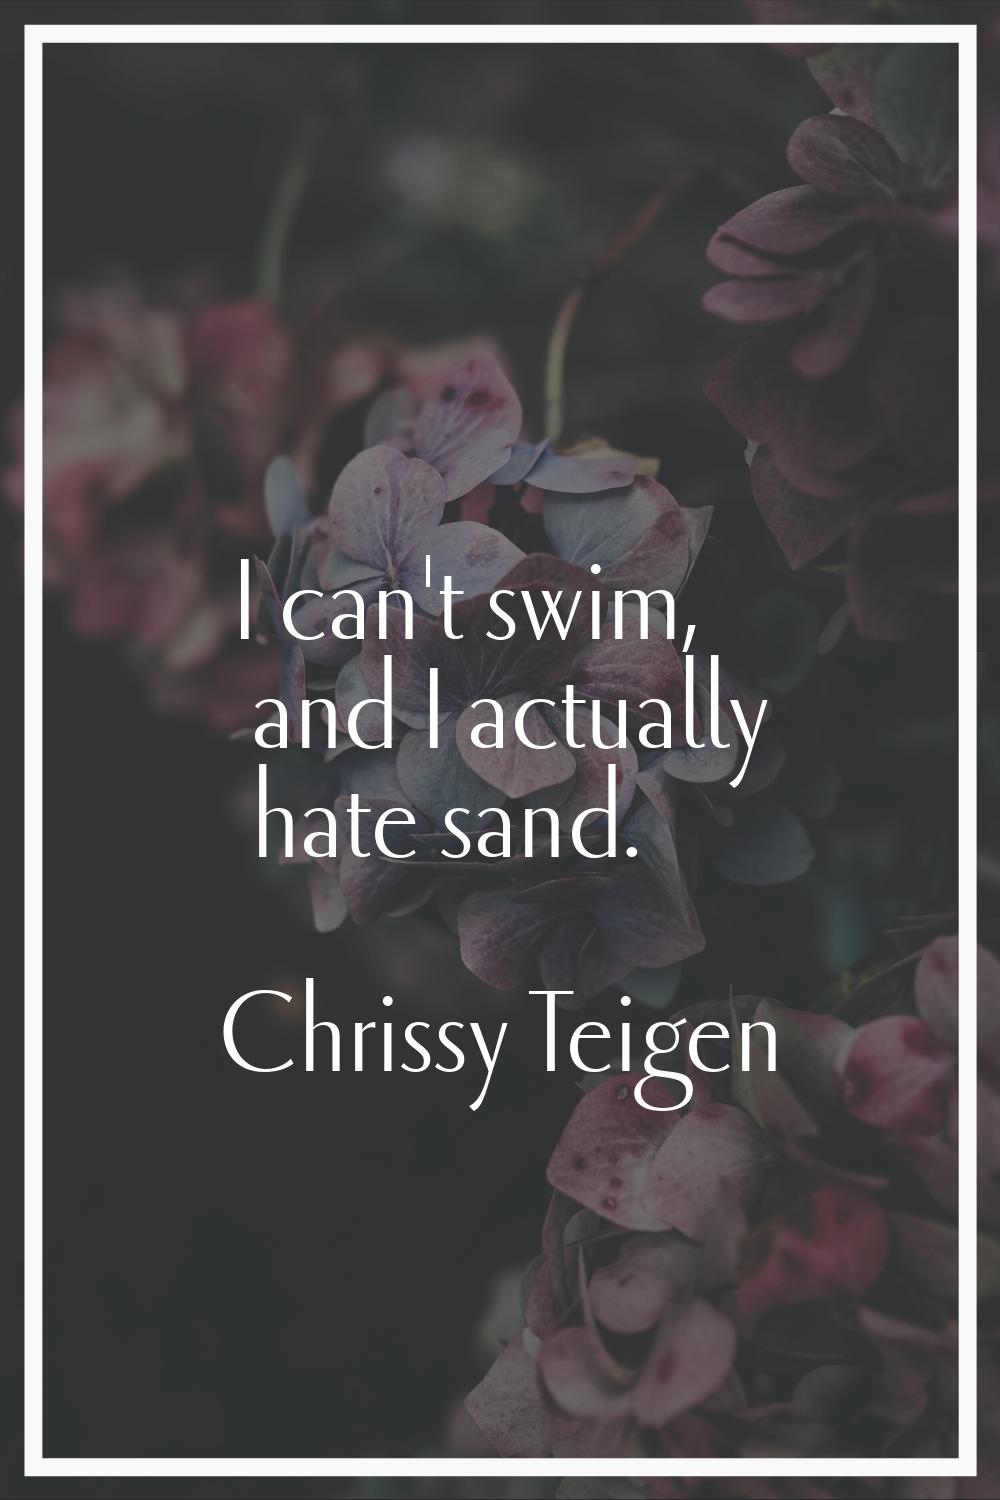 I can't swim, and I actually hate sand.